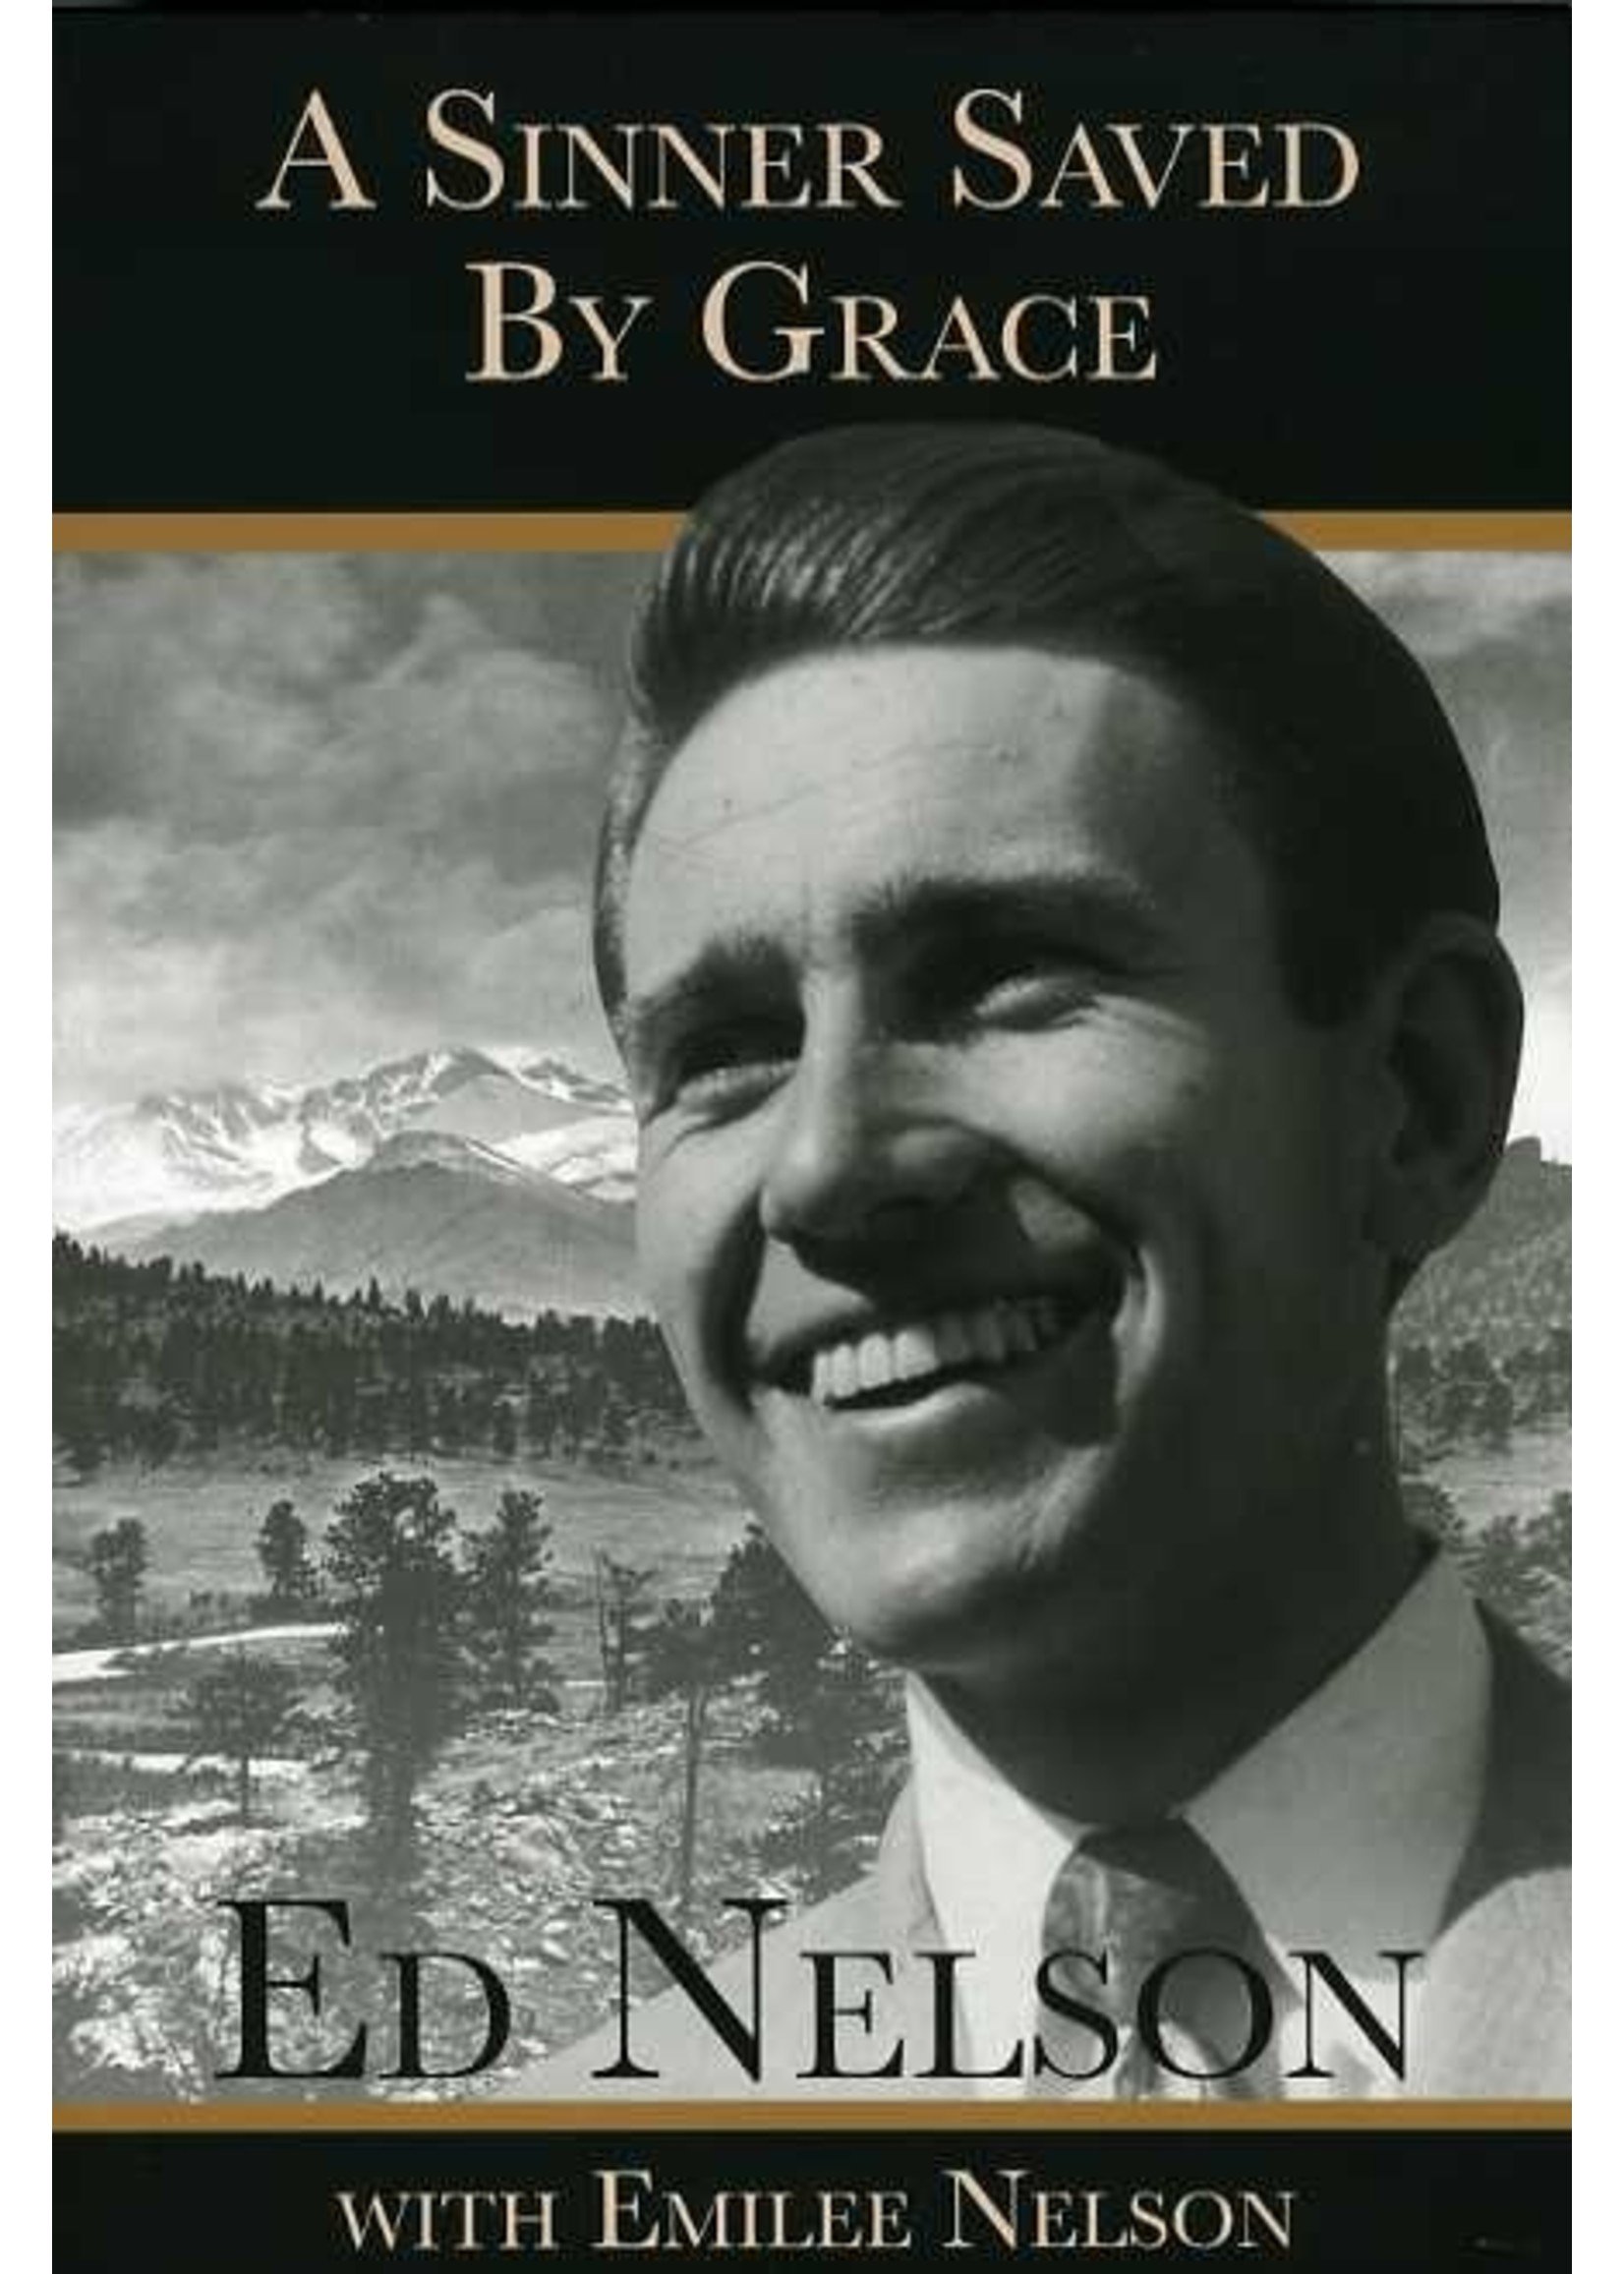 Ed Nelson Evangelistic Association A Sinner Saved by Grace (Hardcover) - Emilee Nelson